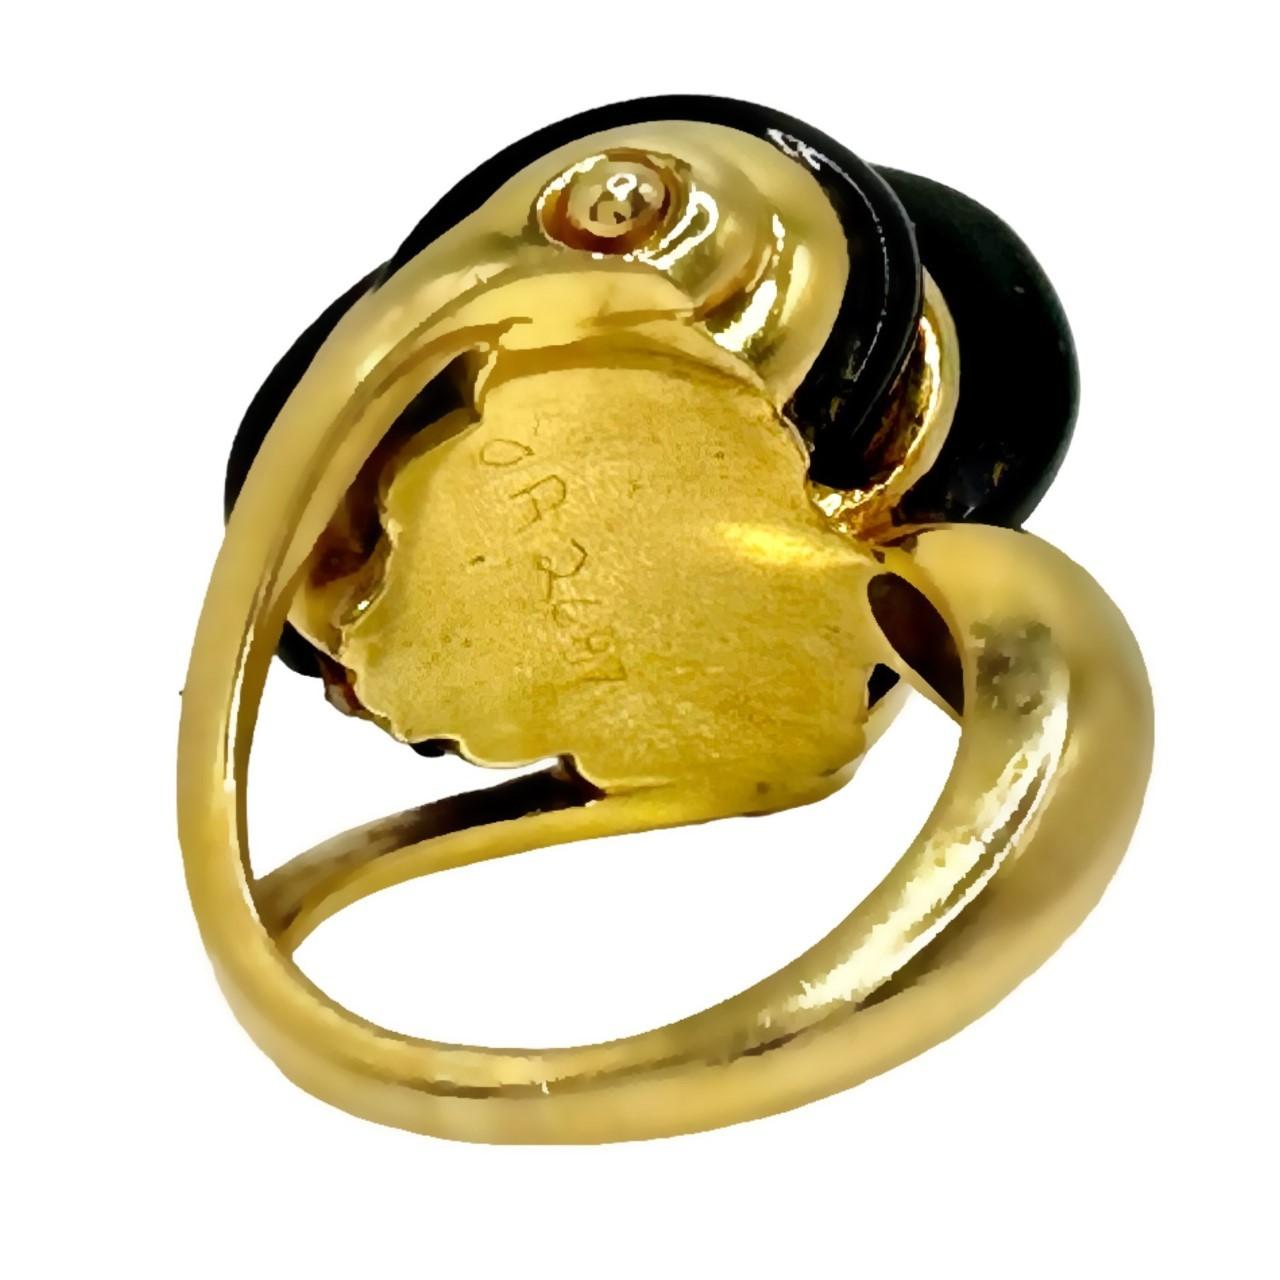 18k Yellow Gold and Onyx Vintage American Modernist Ring 1